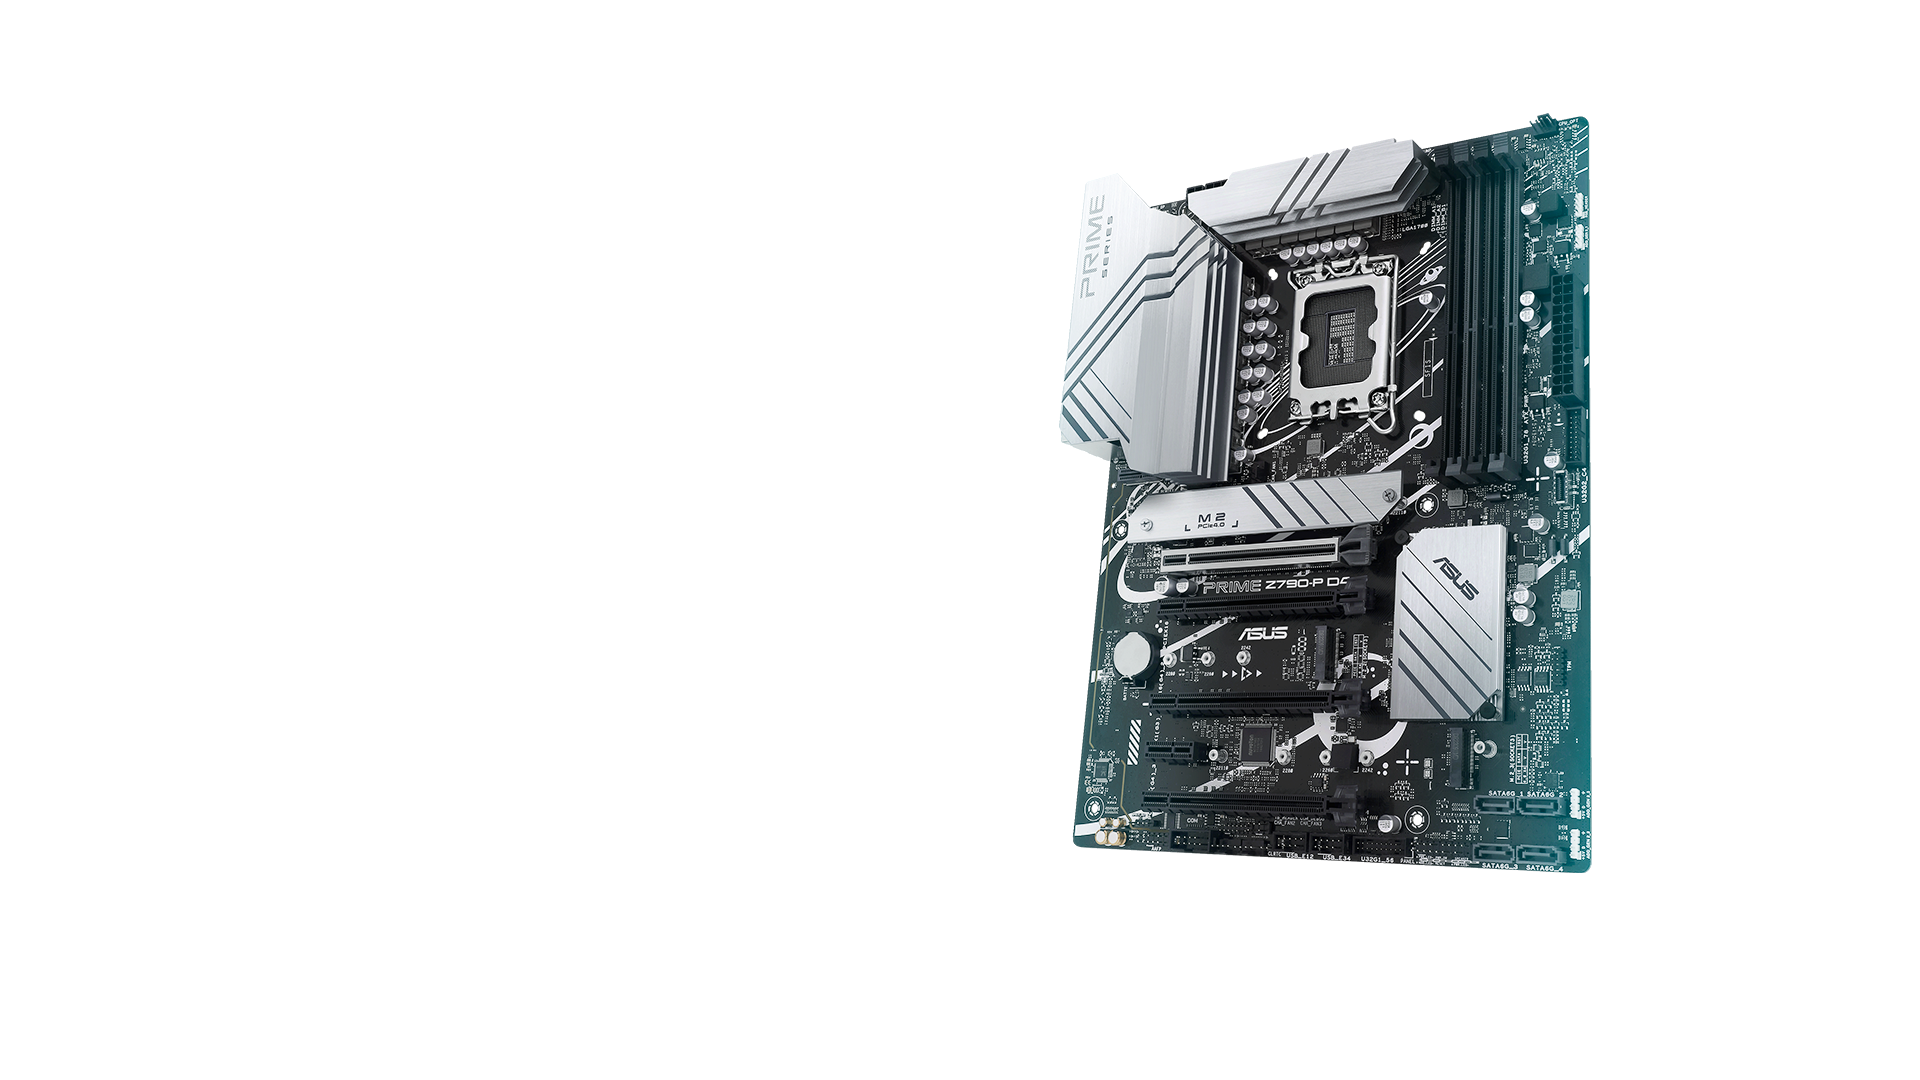 PRIME Z790-P D4 provides users and PC DIY builders a range of performance tuning options via intuitive software and firmware features